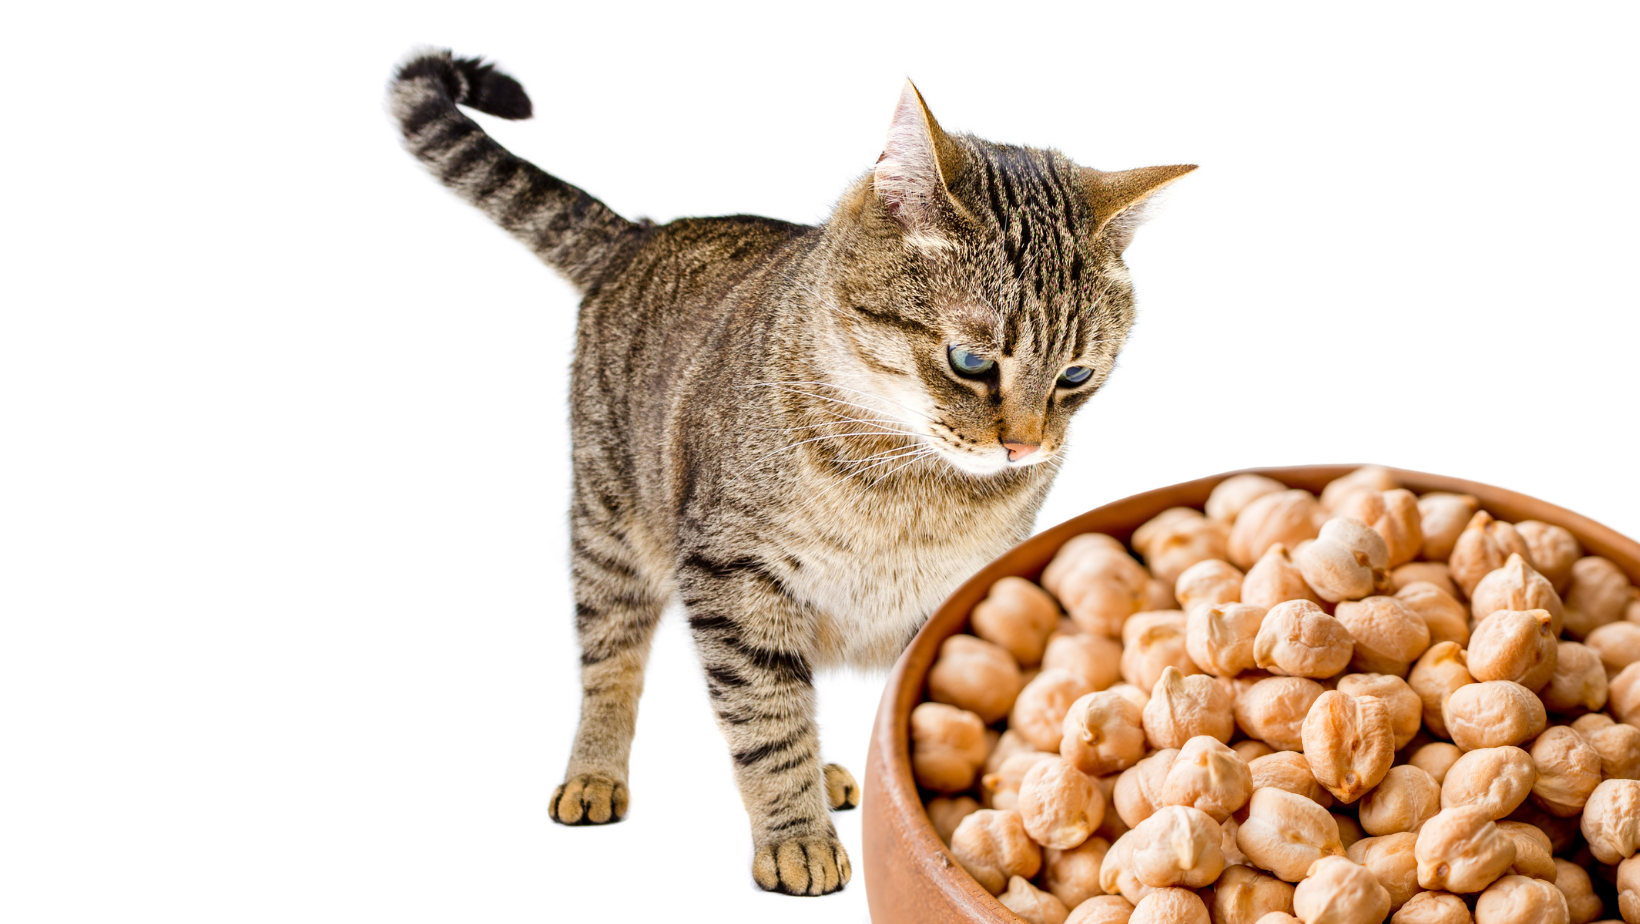 Can Cats Eat Garbanzo Beans?